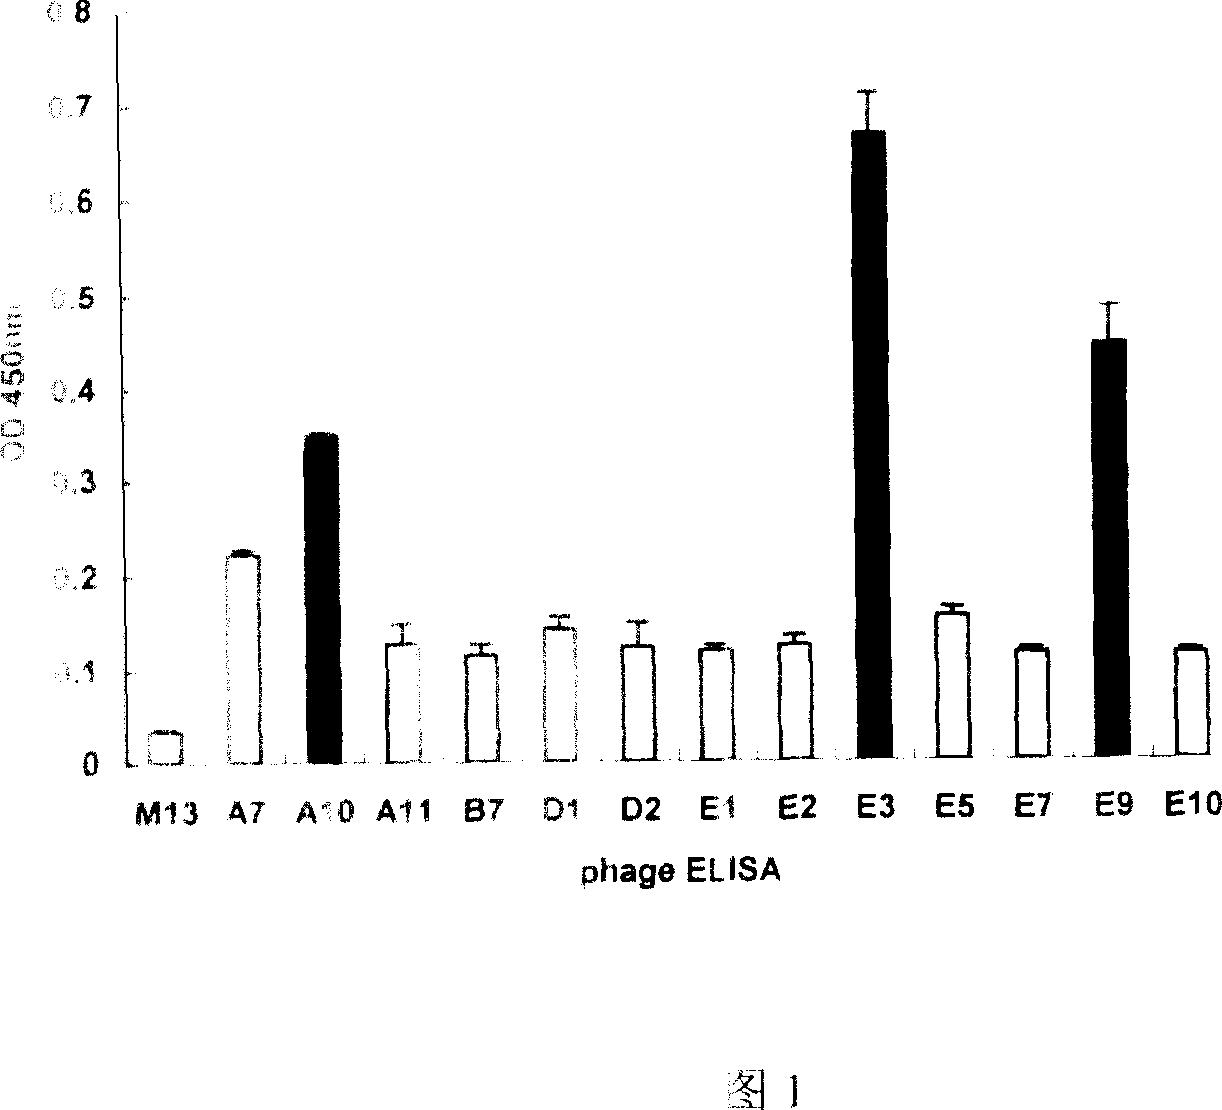 Antibody for treating or preventing senile dementia, its expression vector and application in drug preparation